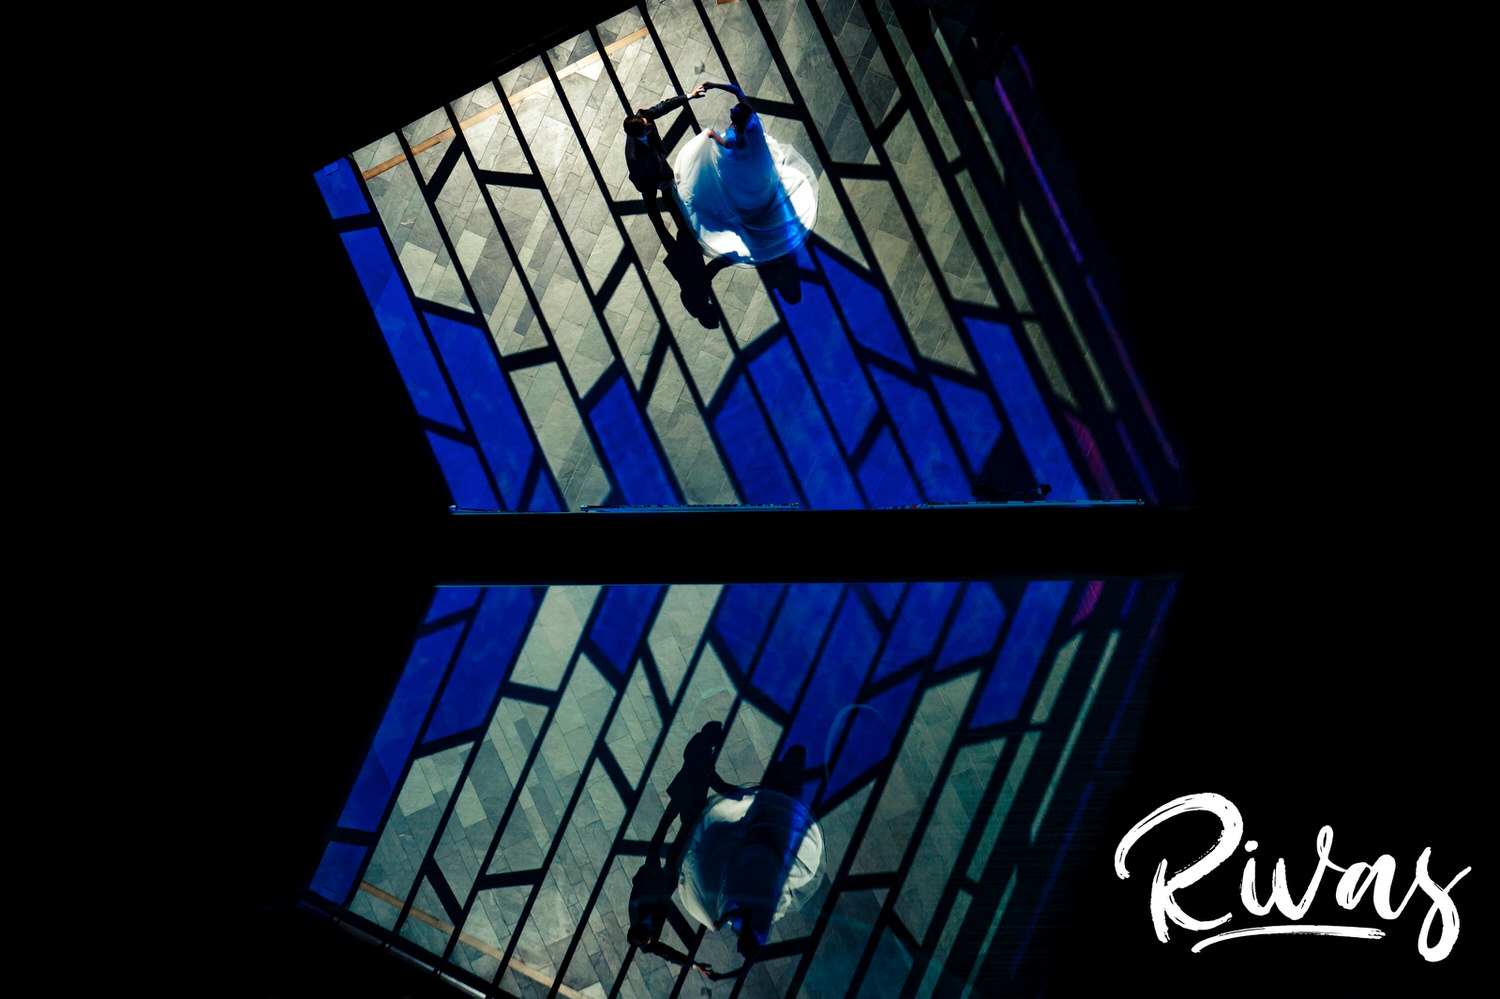 A vibrant picture taken from a balcony looking down of a bride and groom dancing in a wash of bright blue stained glass window light, with a reflection in the balcony's glass partition at The Museum at Prairiefire. 